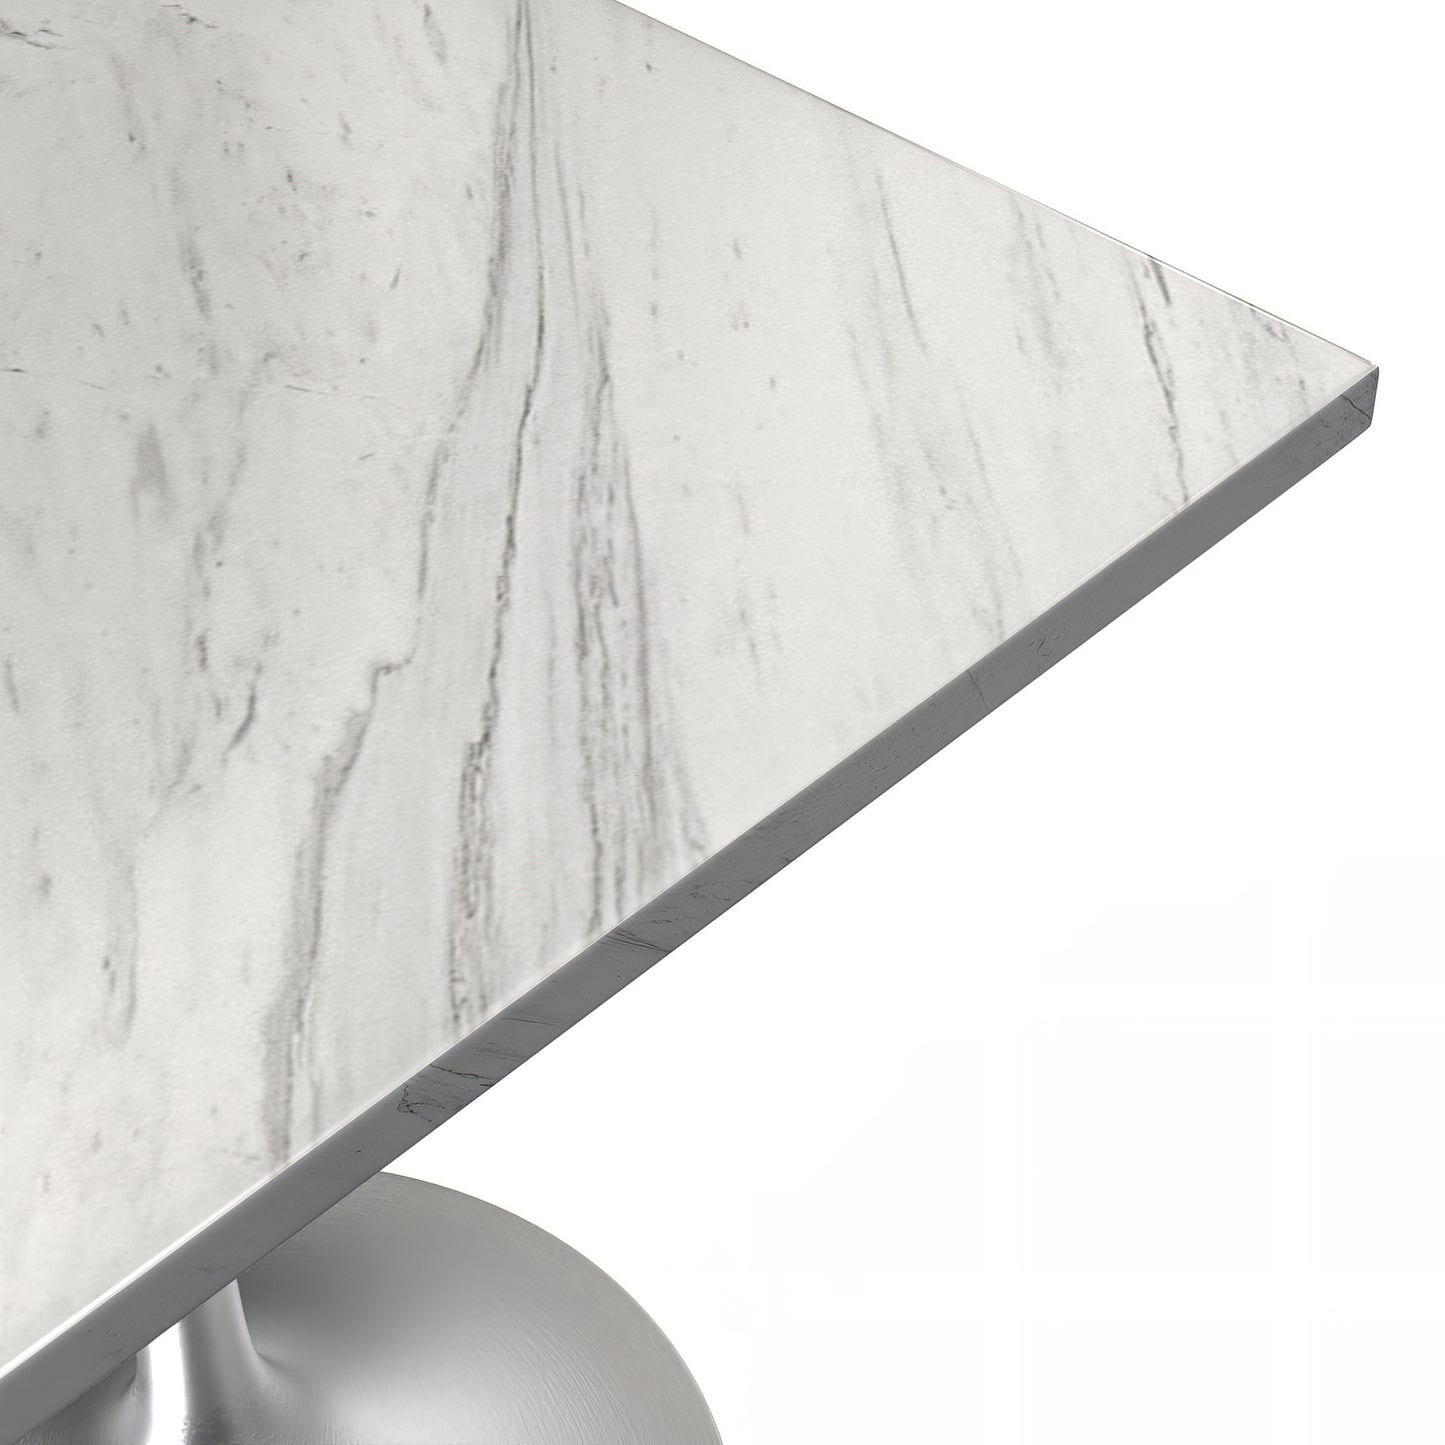 Vera 27" Square Dining Table - Marbleized Top